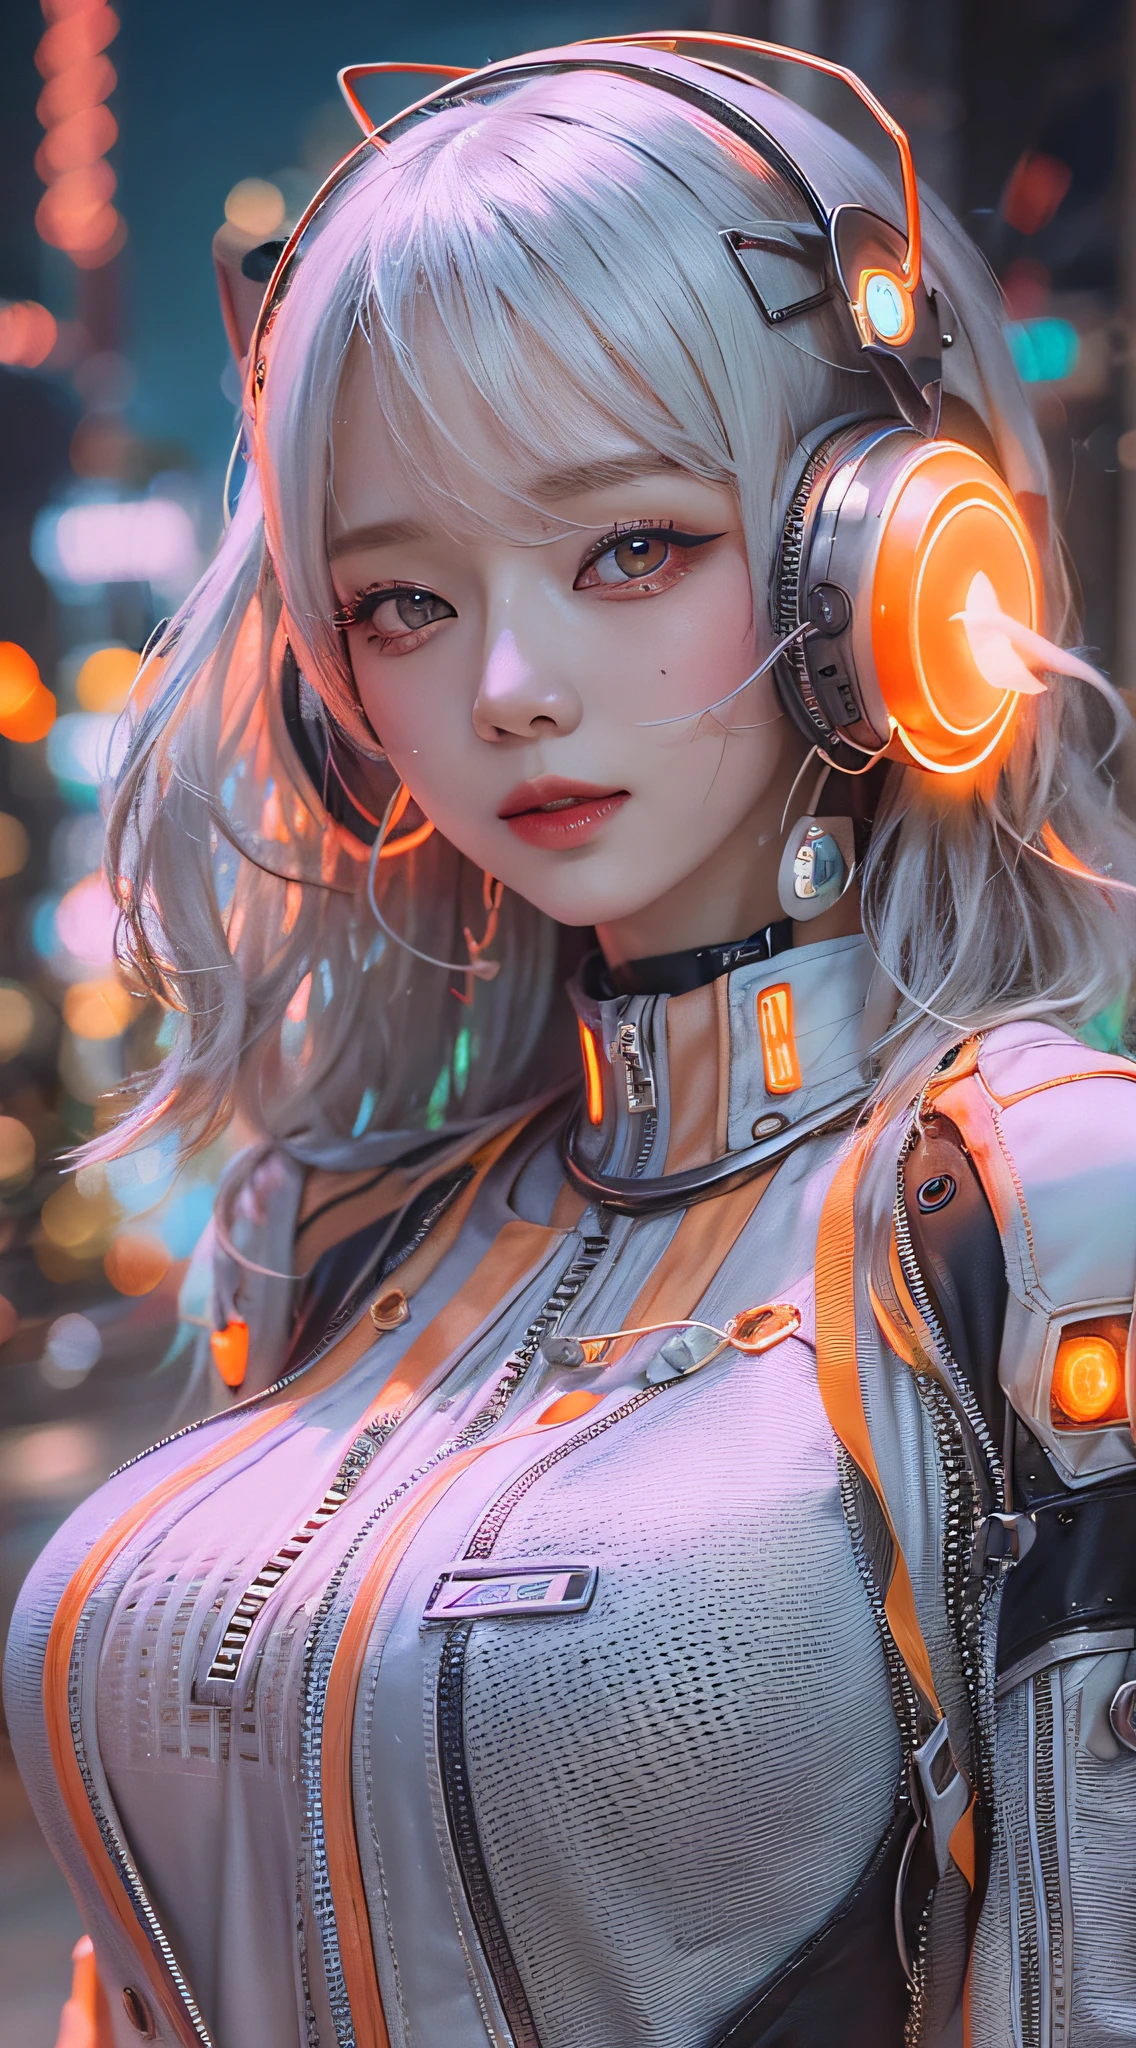 1 girl, Chinese_clothes, liquid silver and orange, cyberhan, cheongsam, cyberpunk city, dynamic pose, detailed luminous headphones, glowing hair accessories, long hair, glowing earrings, glowing necklace, cyberpunk, high-tech city, full of mechanical and futuristic elements, futuristic, technology, glowing neon, orange, orange light, transparent tulle, transparent streamers, laser, digital background urban sky, big moon, with vehicles, best quality, masterpiece, 8K, character edge light, Super high detail, high quality, the most beautiful woman in human beings, micro smile, face facing front and left and right symmetry, ear decoration, beautiful pupils, light effects, visual data, silver white hair, super detail facial texture